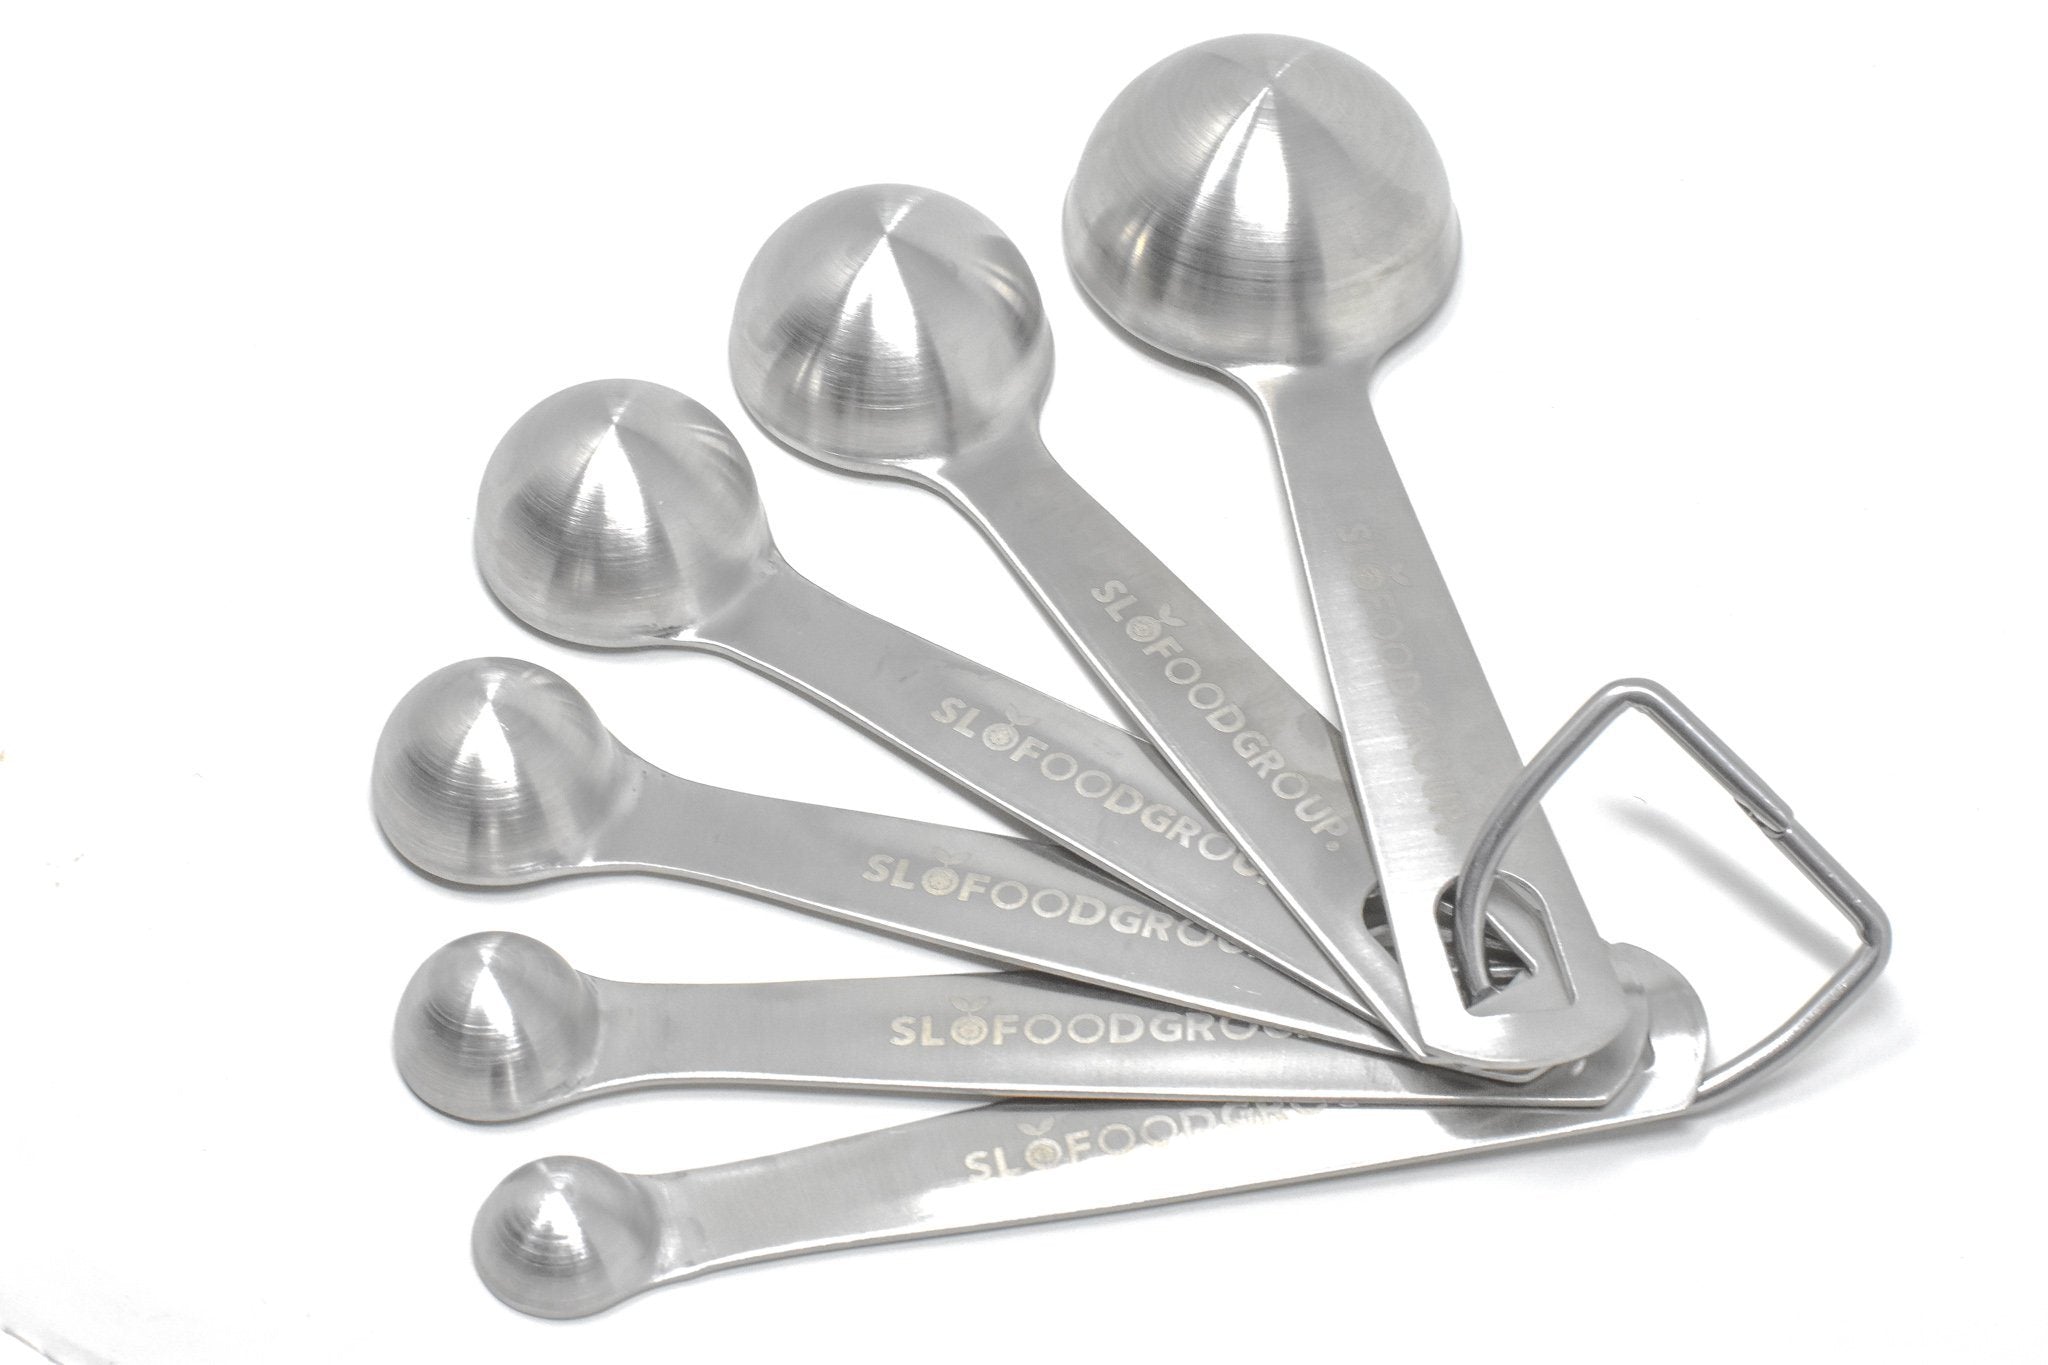 Endurance Odd Sizes Stainless Steel Measuring Spoons, Set of 5 - Fante's  Kitchen Shop - Since 1906